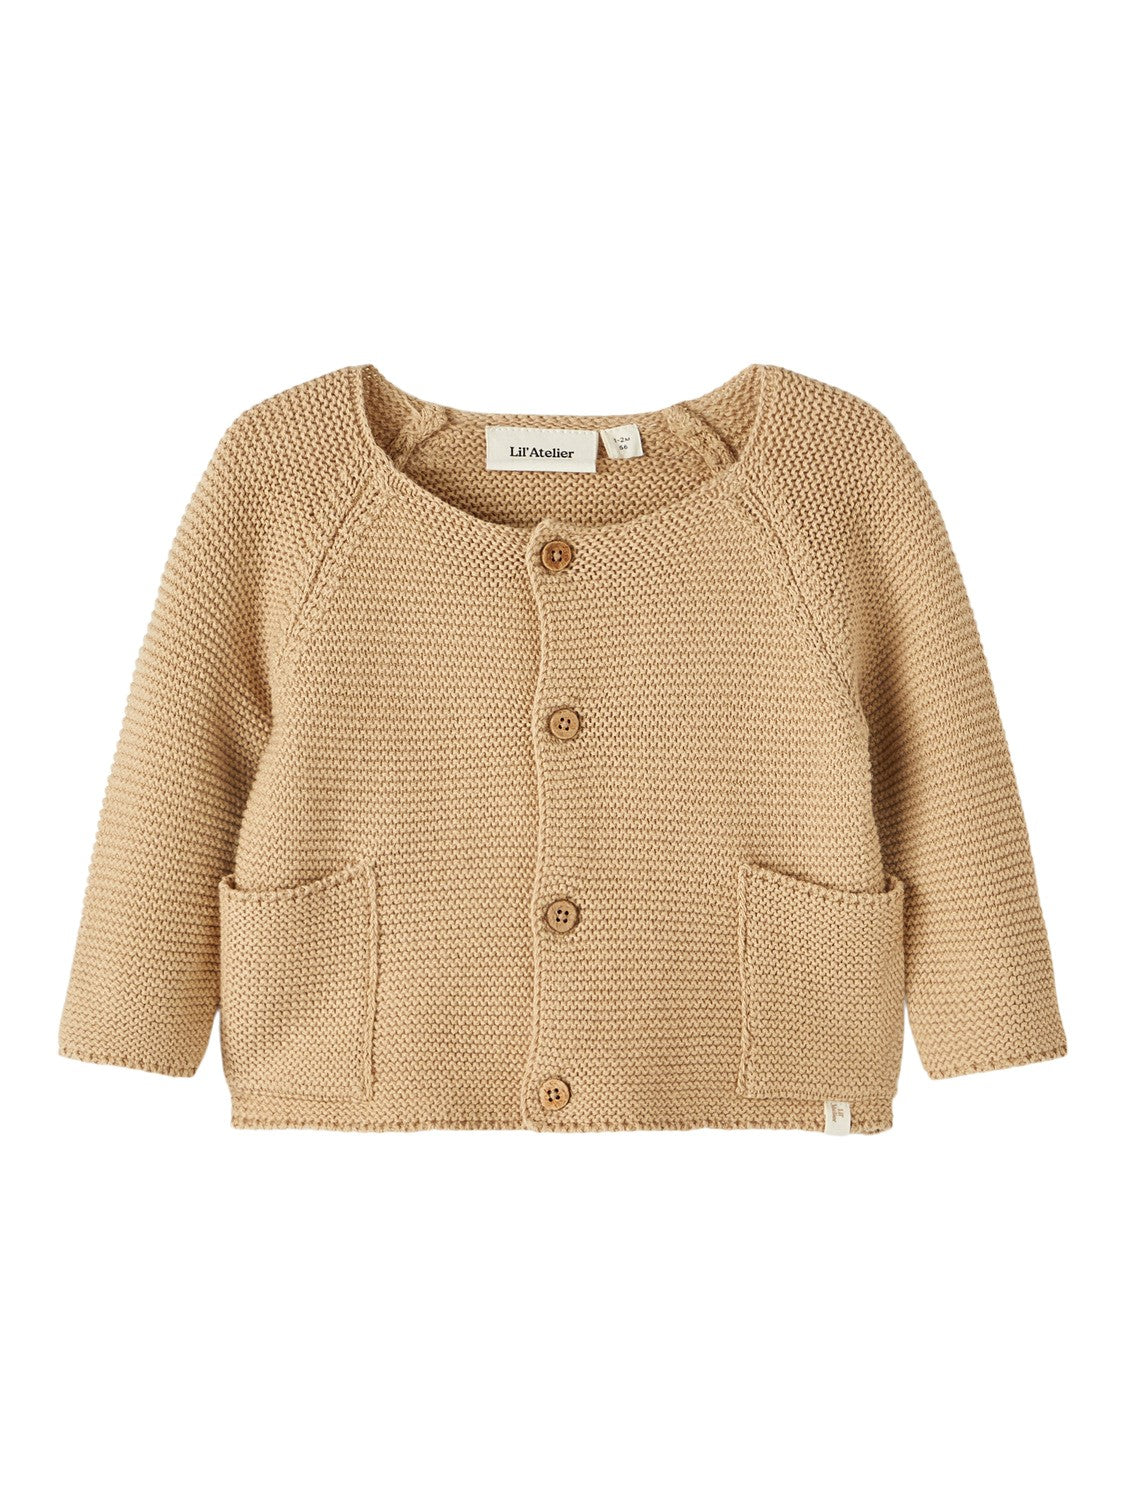 Lil Atelier Laguno Loose Knit - Curds & Whey